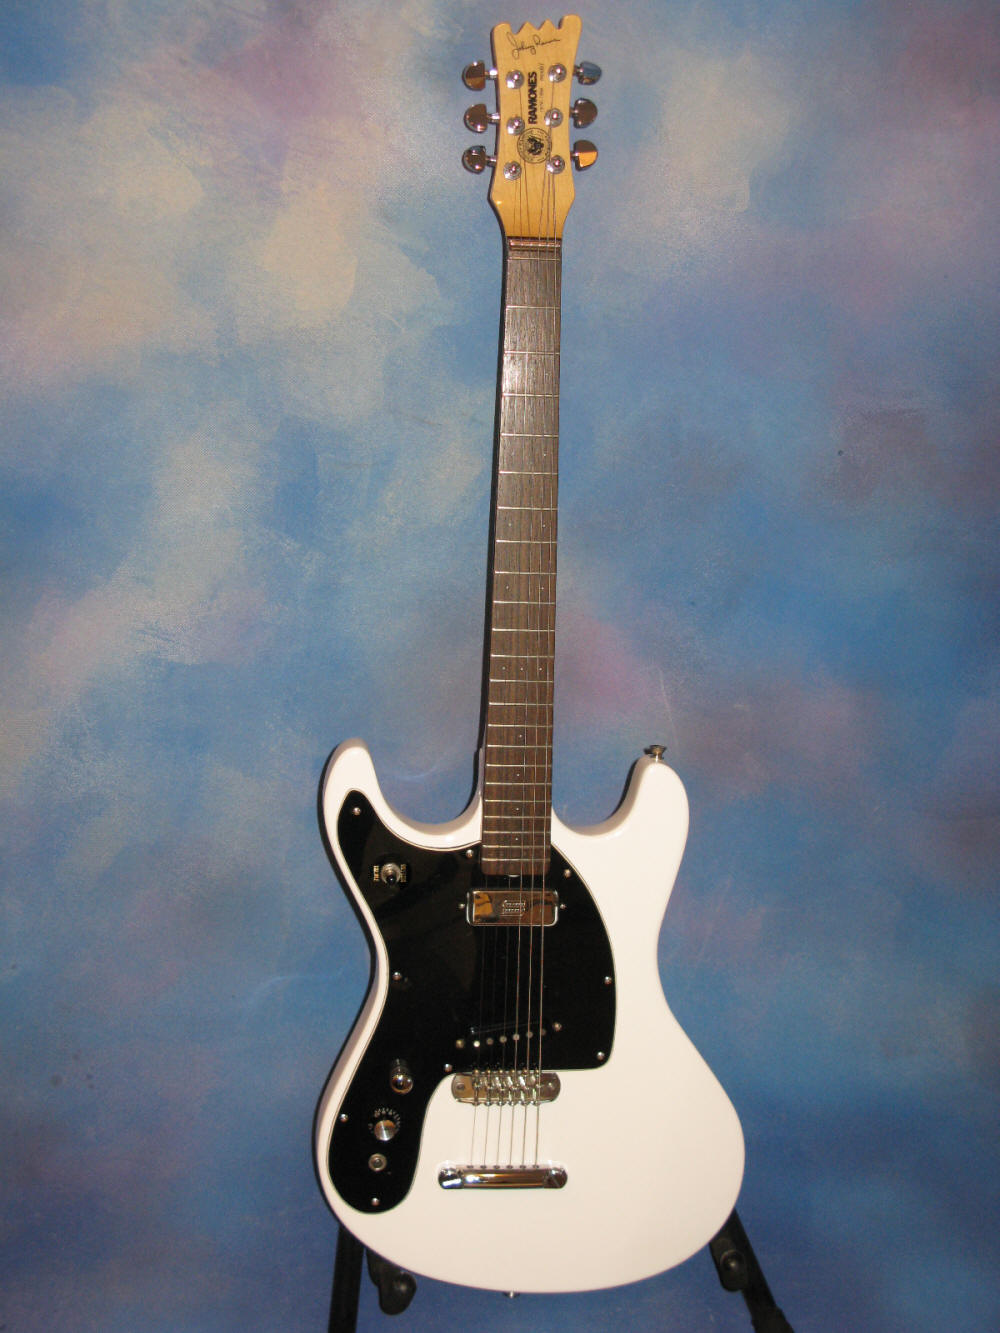 Awesome lefty Mosrite Johnny Ramone Model Real cool piece and kinda 